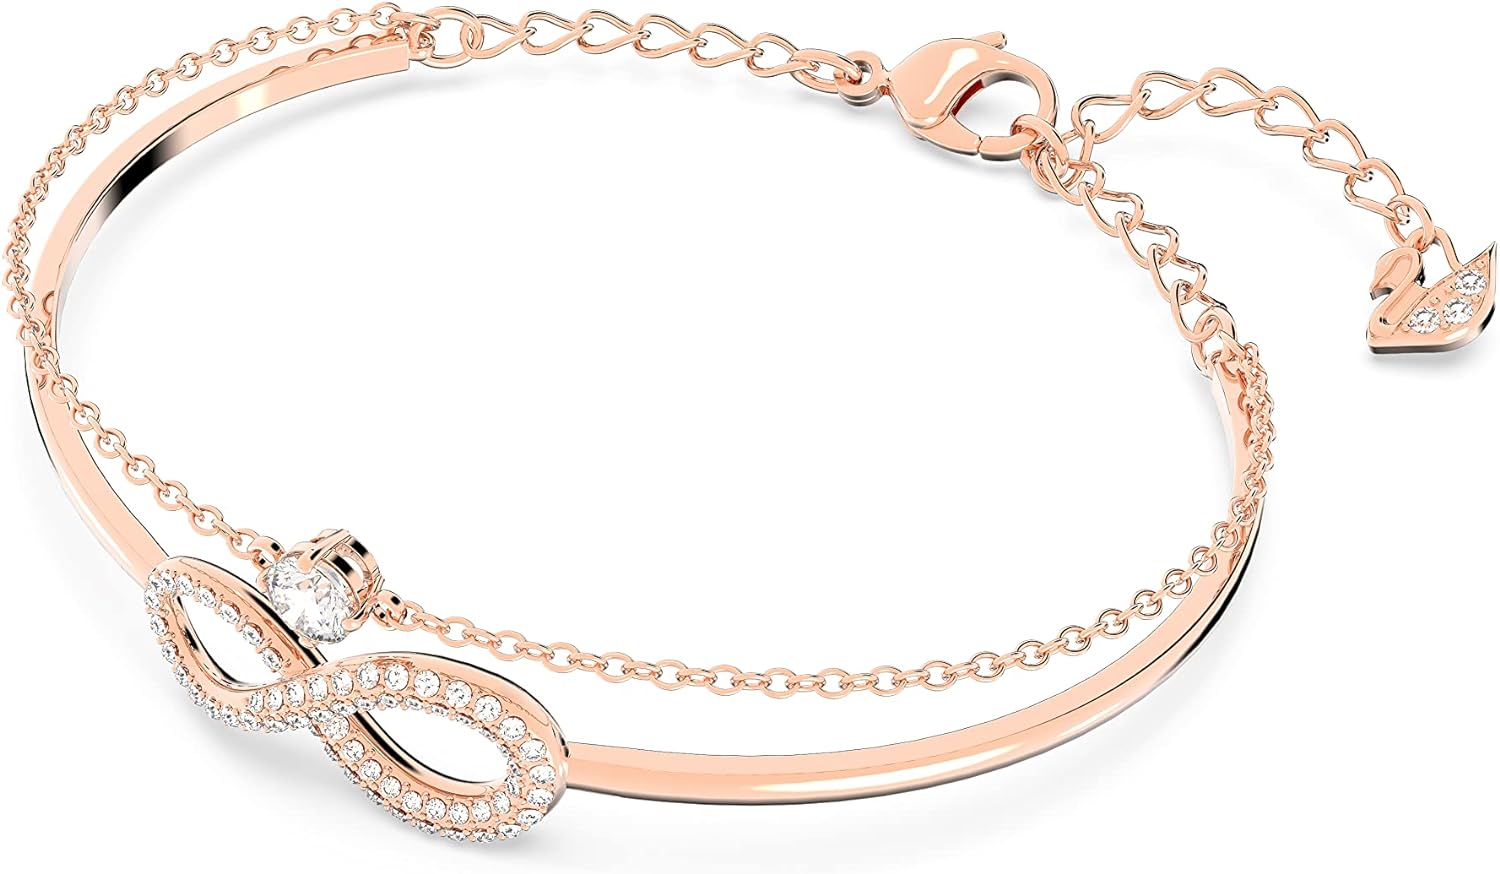 SWAROVSKI Infinity Twist Jewelry Collection, Bracelets  Necklaces, Rhodium  Rose Gold Tone Finish, Clear Crystals